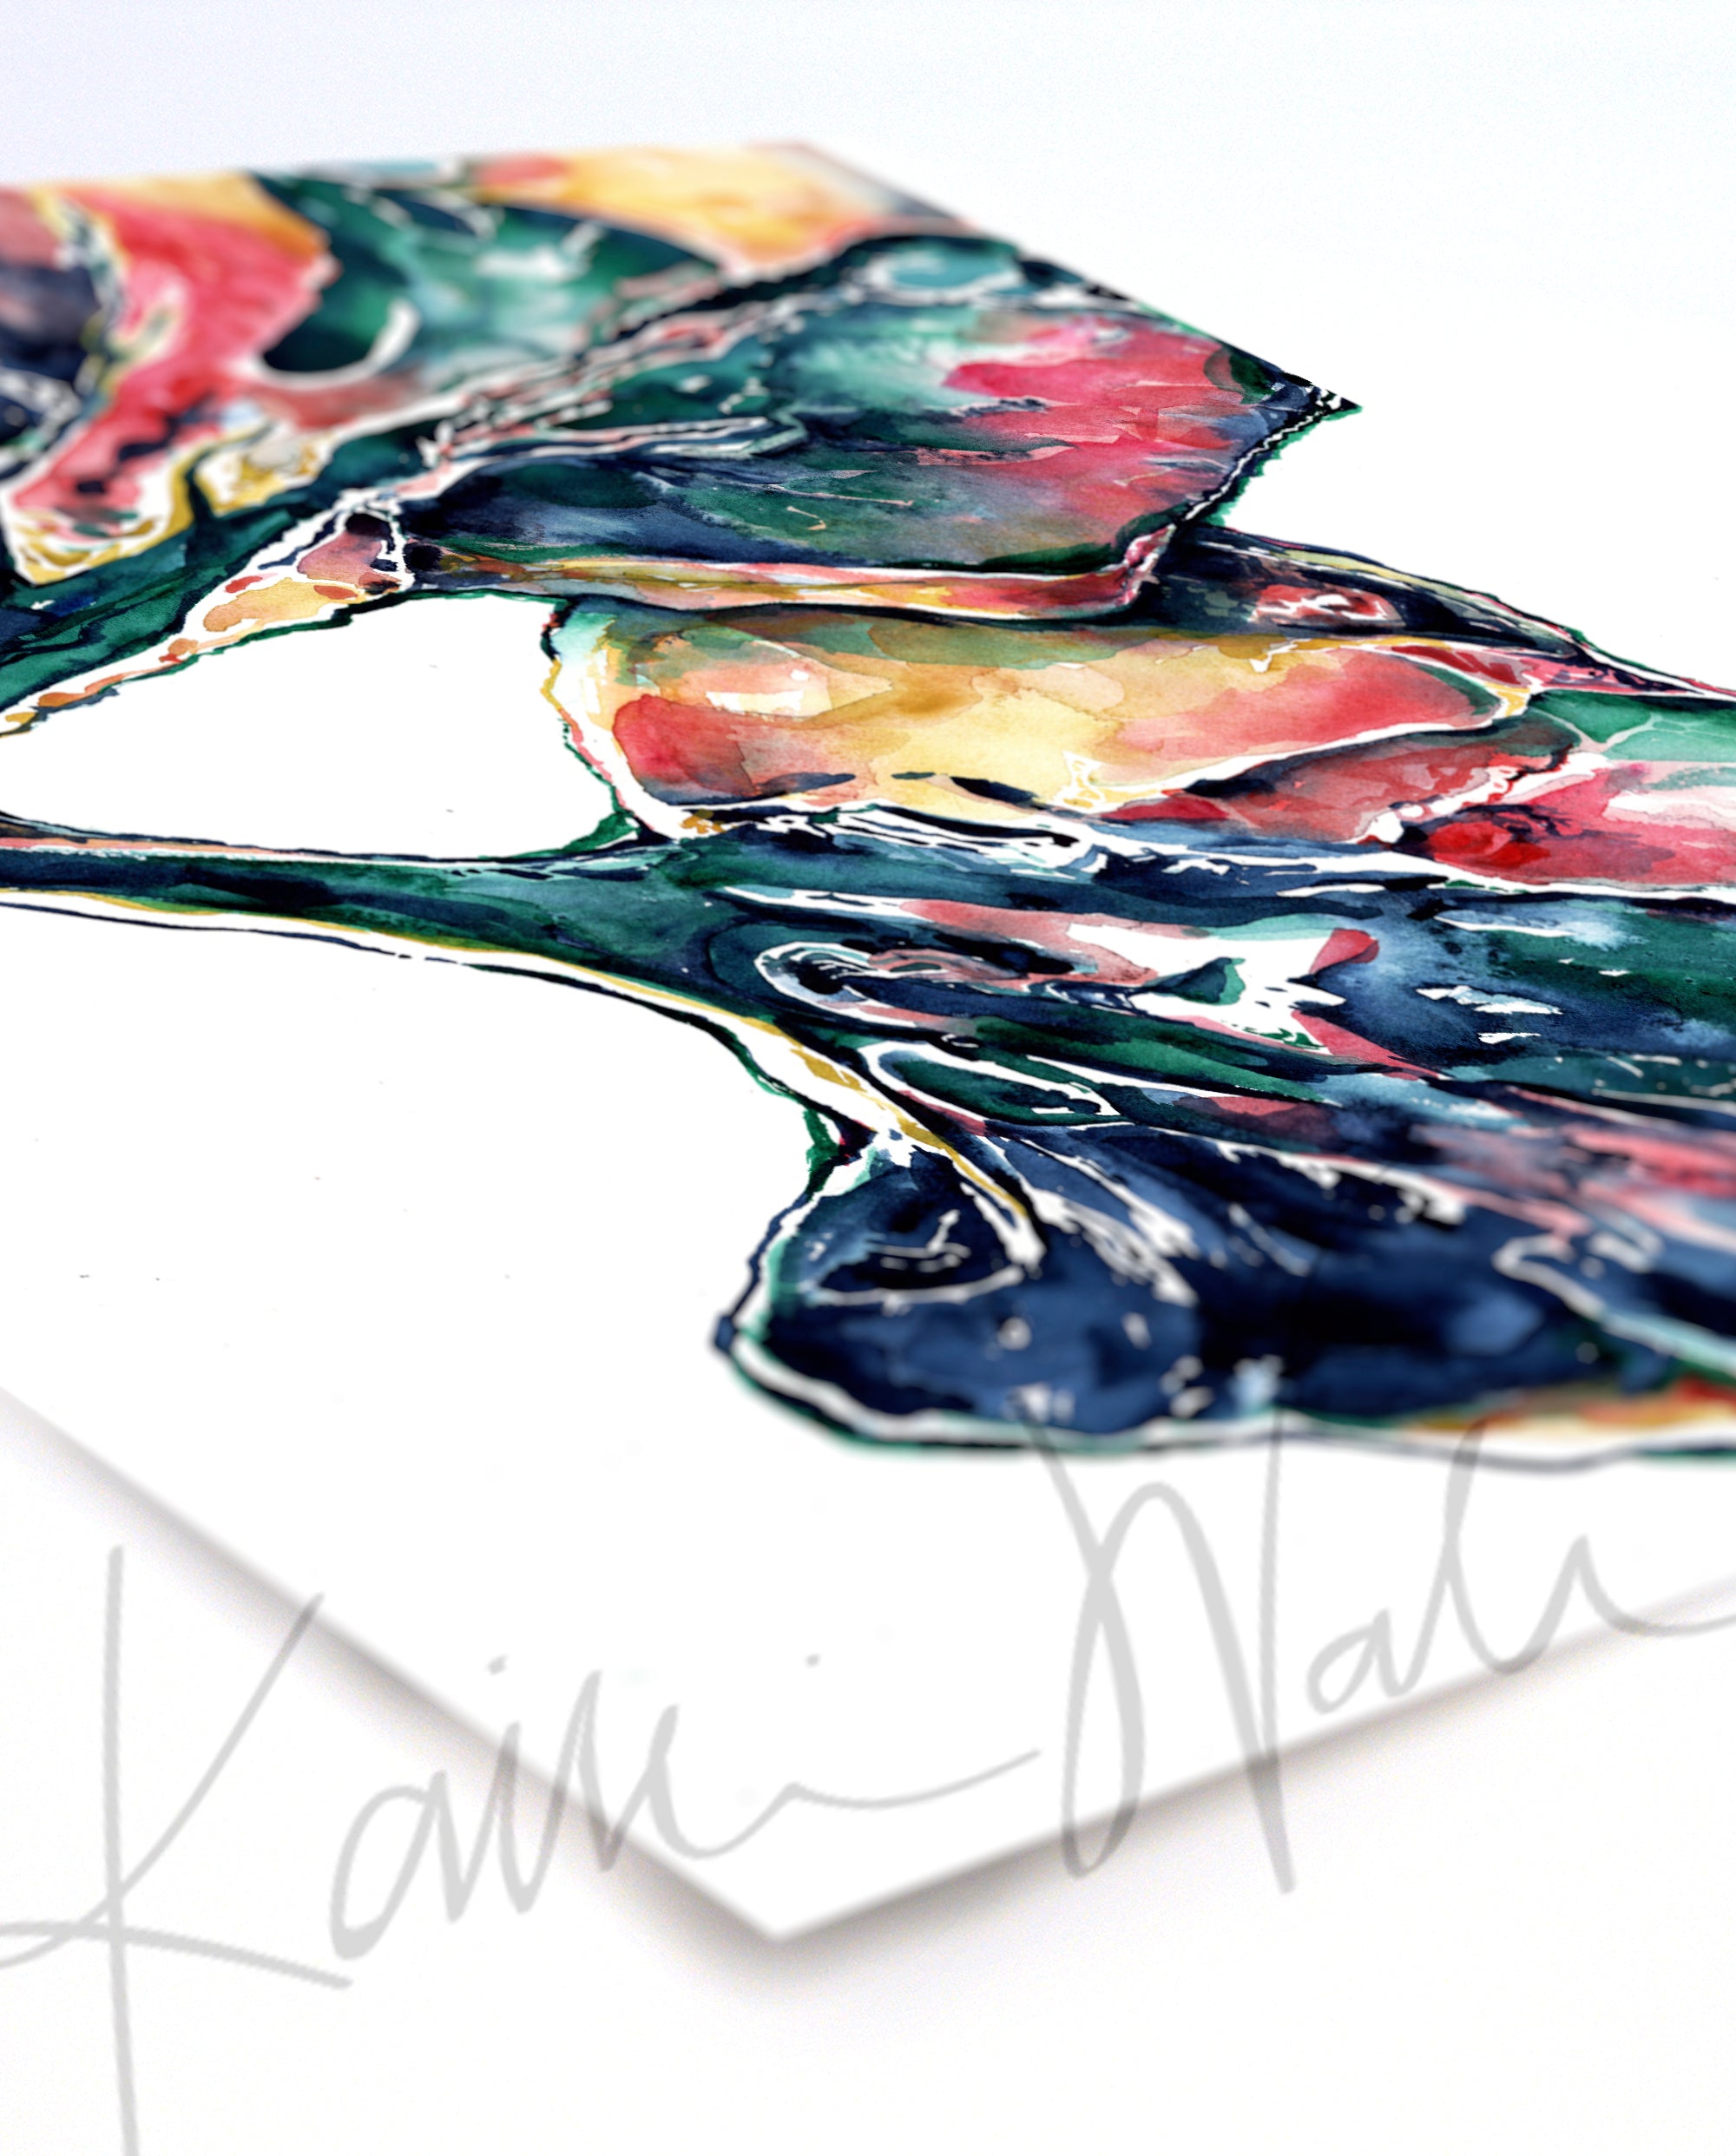 Unramed colorful, abstract watercolor painting at an angle of a lung dissection in navy, green, yellow, and pink. 